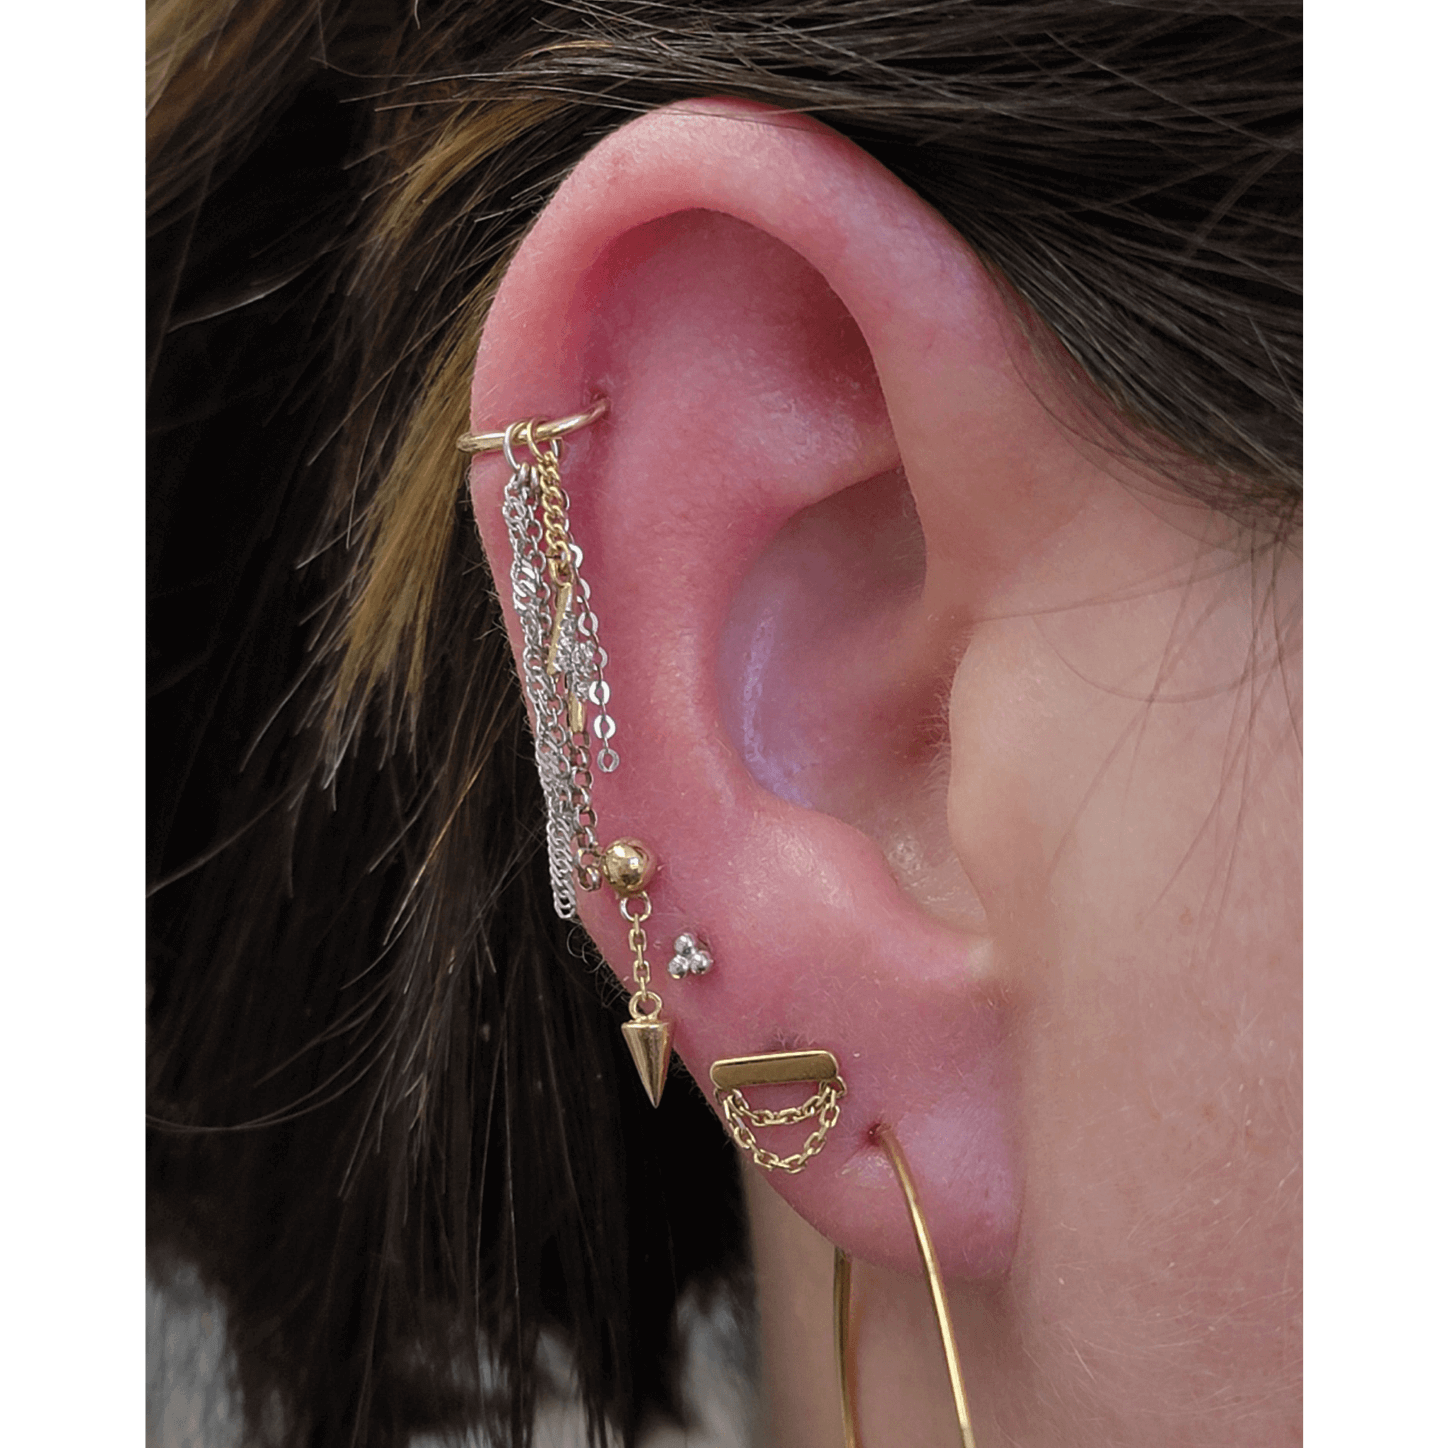 Ear curation done with a mix of white and yellow gold